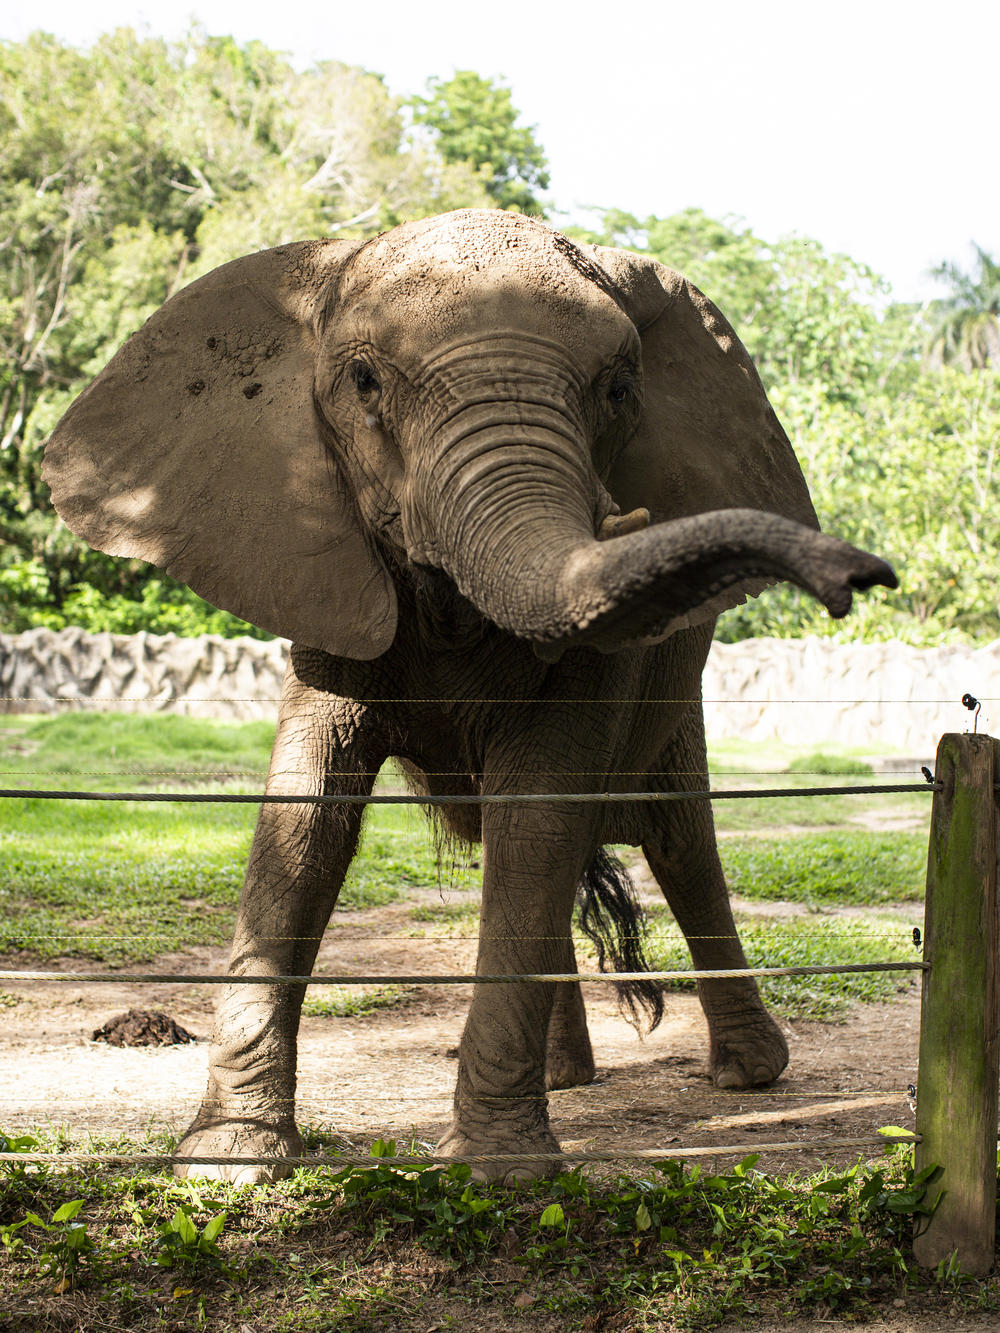 Mundi on her last full day at the Puerto Rico zoo. She was born in Africa in 1982 and lived on a private farm in Florida until Puerto Rico's zoo acquired her when she was 6. Zoo records indicate she was named Mundi after the local newspaper that donated her — <em>El Mundo</em>.